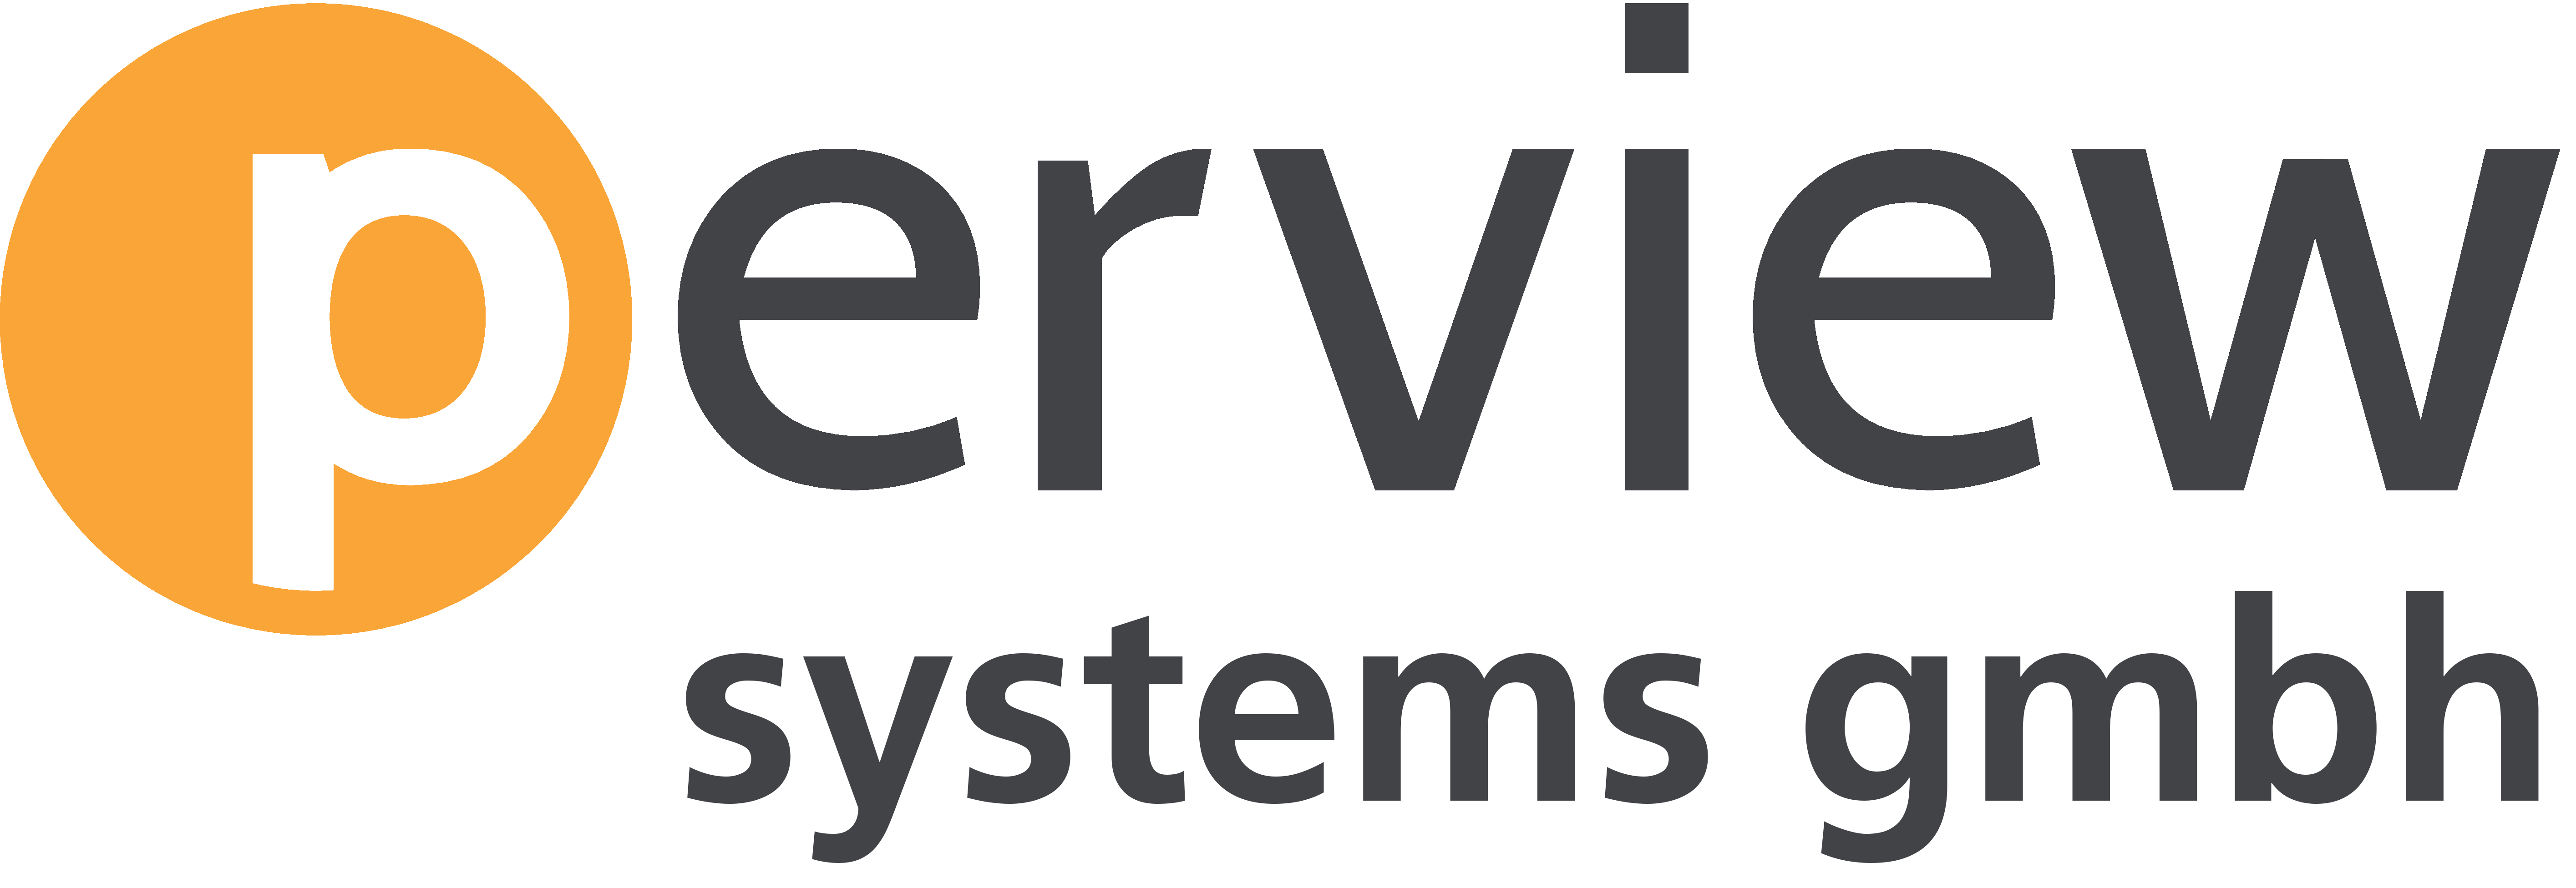 perview systems gmbh Logo